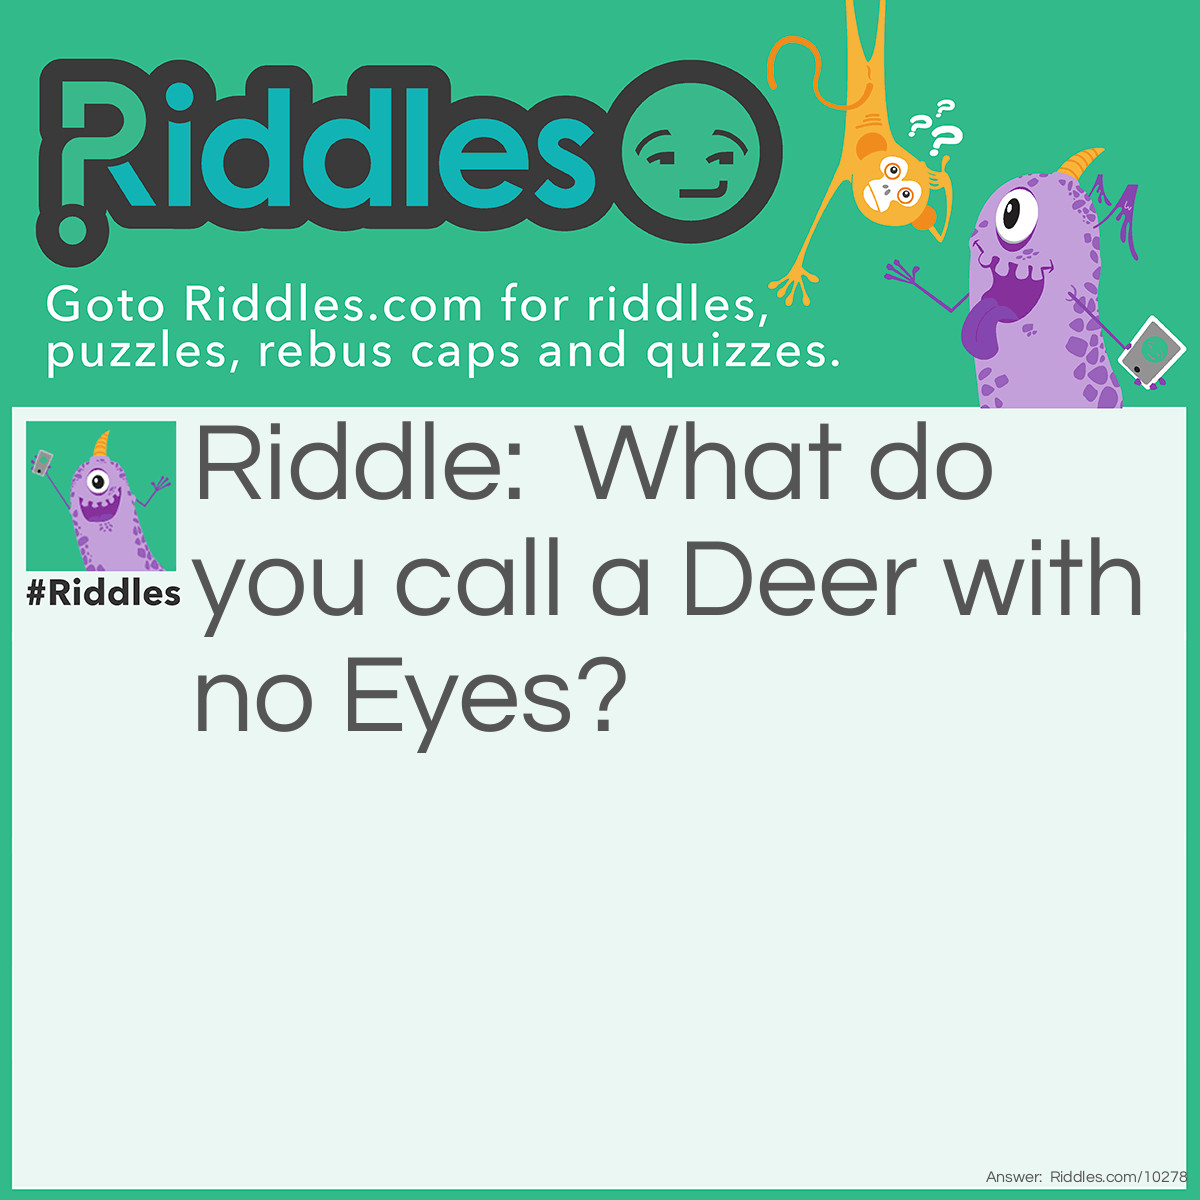 Riddle: What do you call a Deer with no Eyes? Answer: No Eye Deer